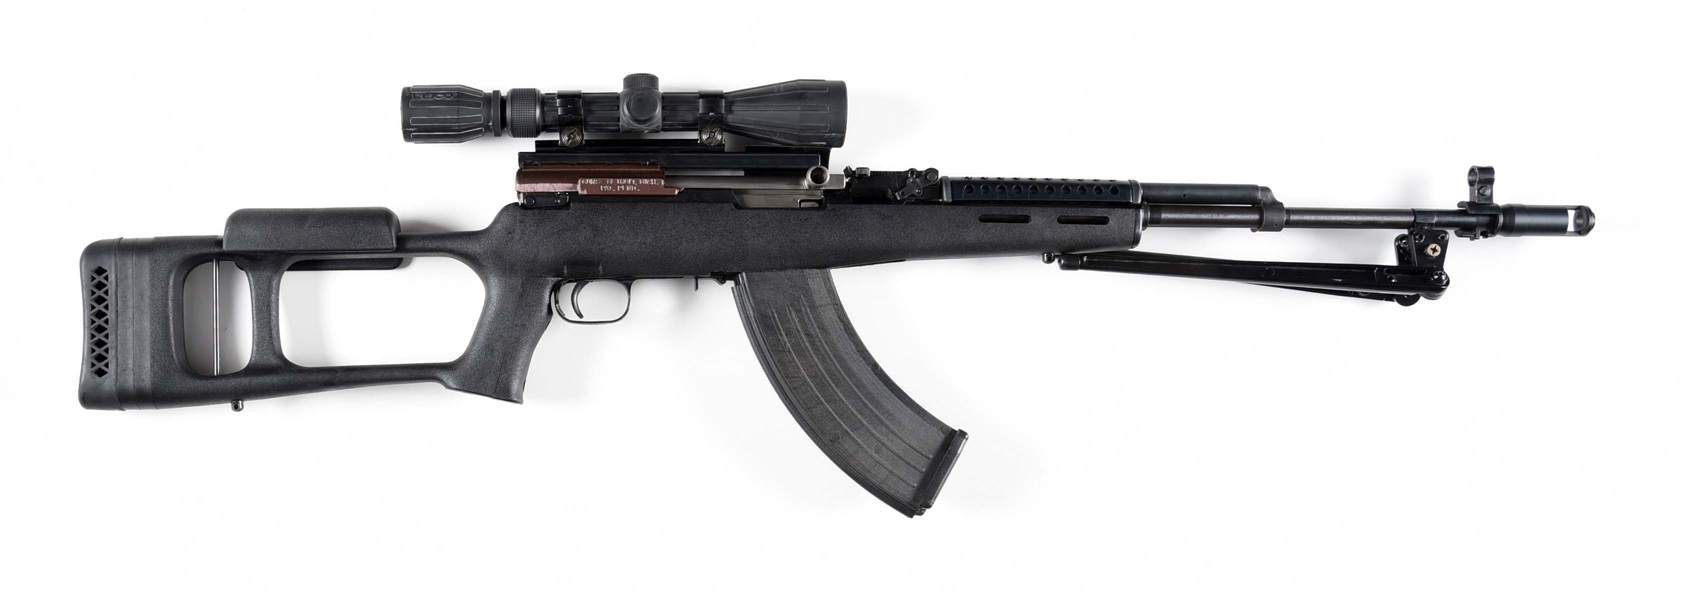 (C) TACTICALLY MODIFIED CHINESE TYPE 56 SKS SEMI-AUTOMATIC RIFLE. 